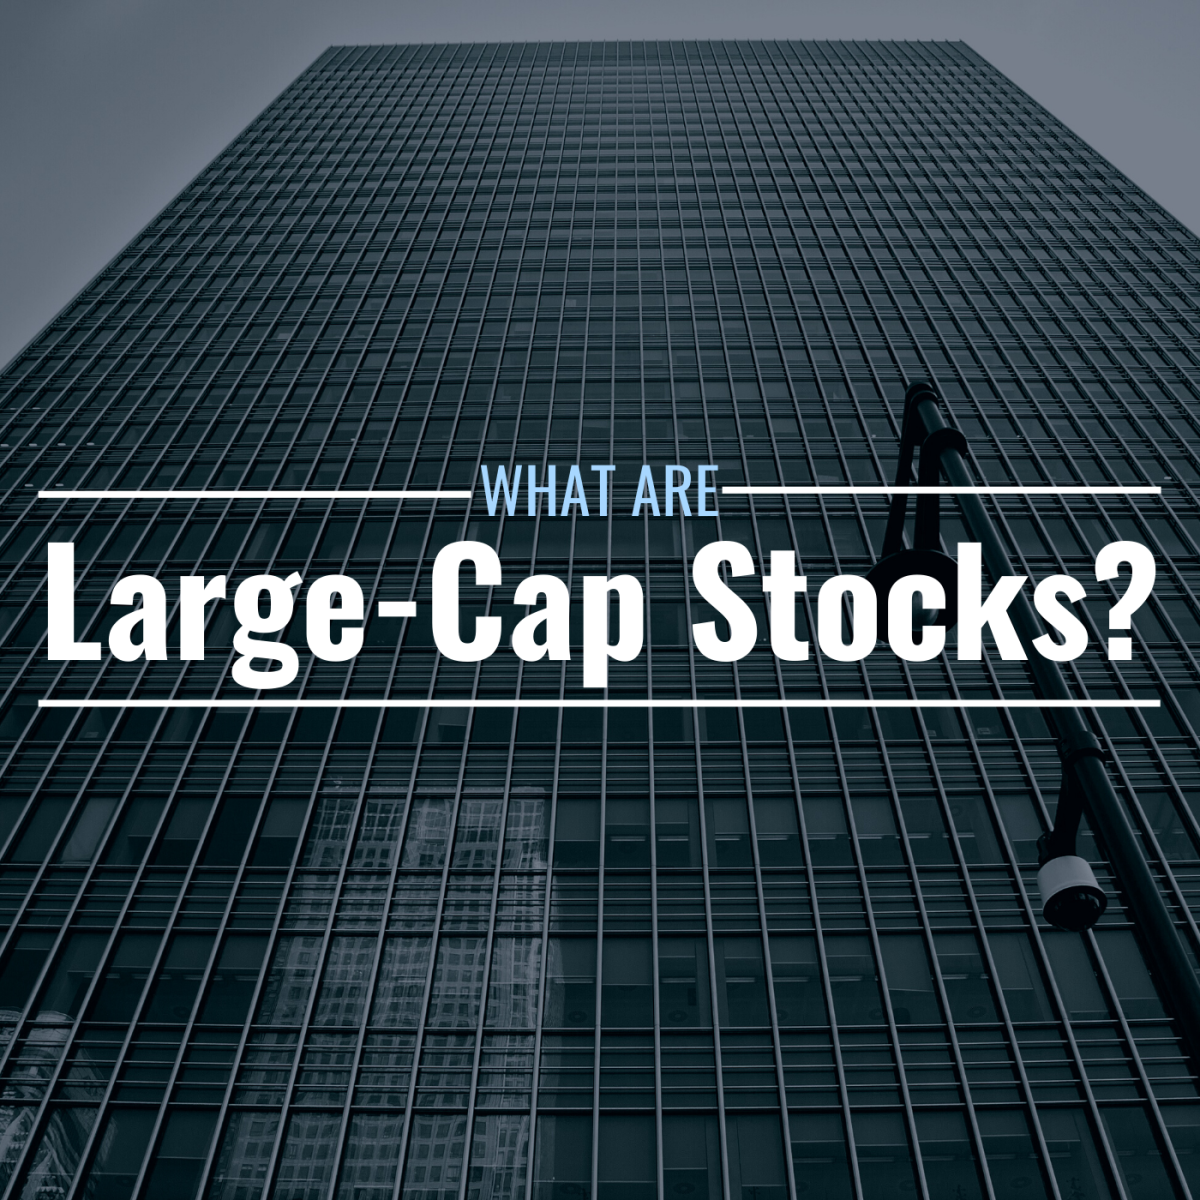 Image of a skyscraper with text overlay: "What Are Large-Cap Stocks?"